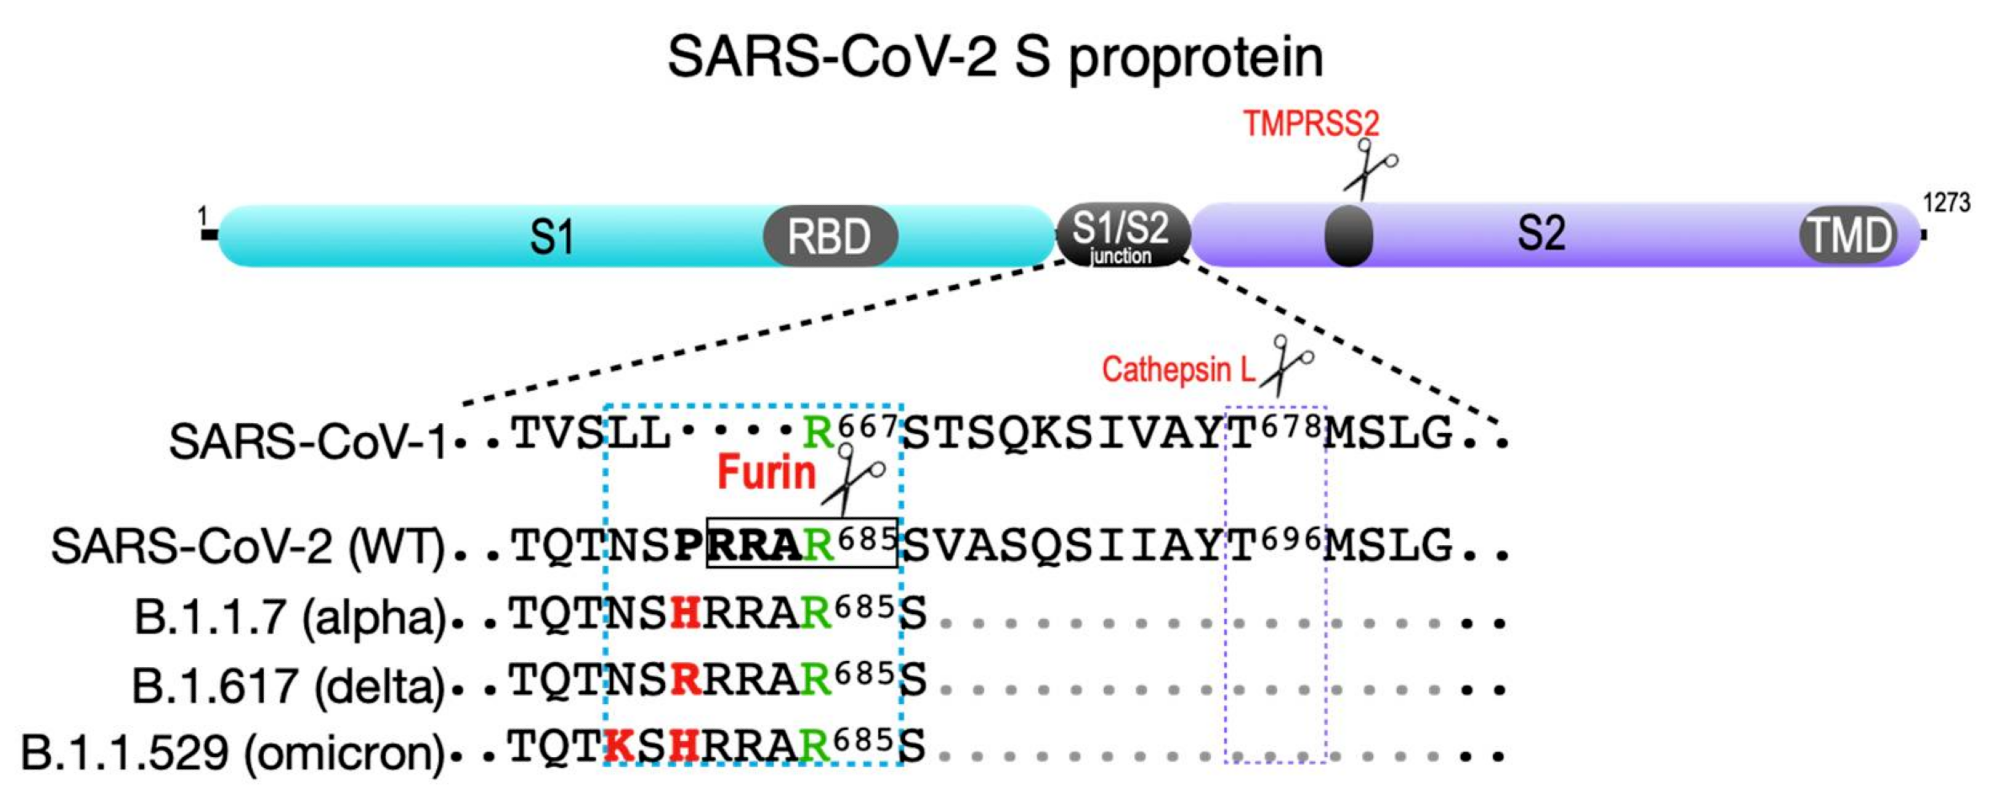 SARS-CoV-2 spike protein. Shown are the S1 and S2 segments in the SARS family S proprotein that flank the S1/S2 cleavage site junction as well as the ACE2 receptor-binding domain (RBD) in S1 and the transmembrane domain (TMD) in S2. The S2′ TMPRSS2 cleavage site is common to all SARS coronaviruses (violet box). The SARS-CoV-1 S1/S2 junction is cut by cathepsin L at Thr678 . SARS-CoV-2 contains a four-amino-acid insertion (PRAA684), which converts the trypsin-sensitive Arg685 residue (green) to the P1 site cut by furin (RRAR685, boxed). The cyan box also shows the B.1.1.7 (alpha variant) furin site containing the P681 → H change; the more transmissible B.1.617.2 (delta variant) furin site, which contains the P681 → R change; and the recently reported B.1.1.529 (omicron variant), which contains both P681 → H and N679 → K changes.